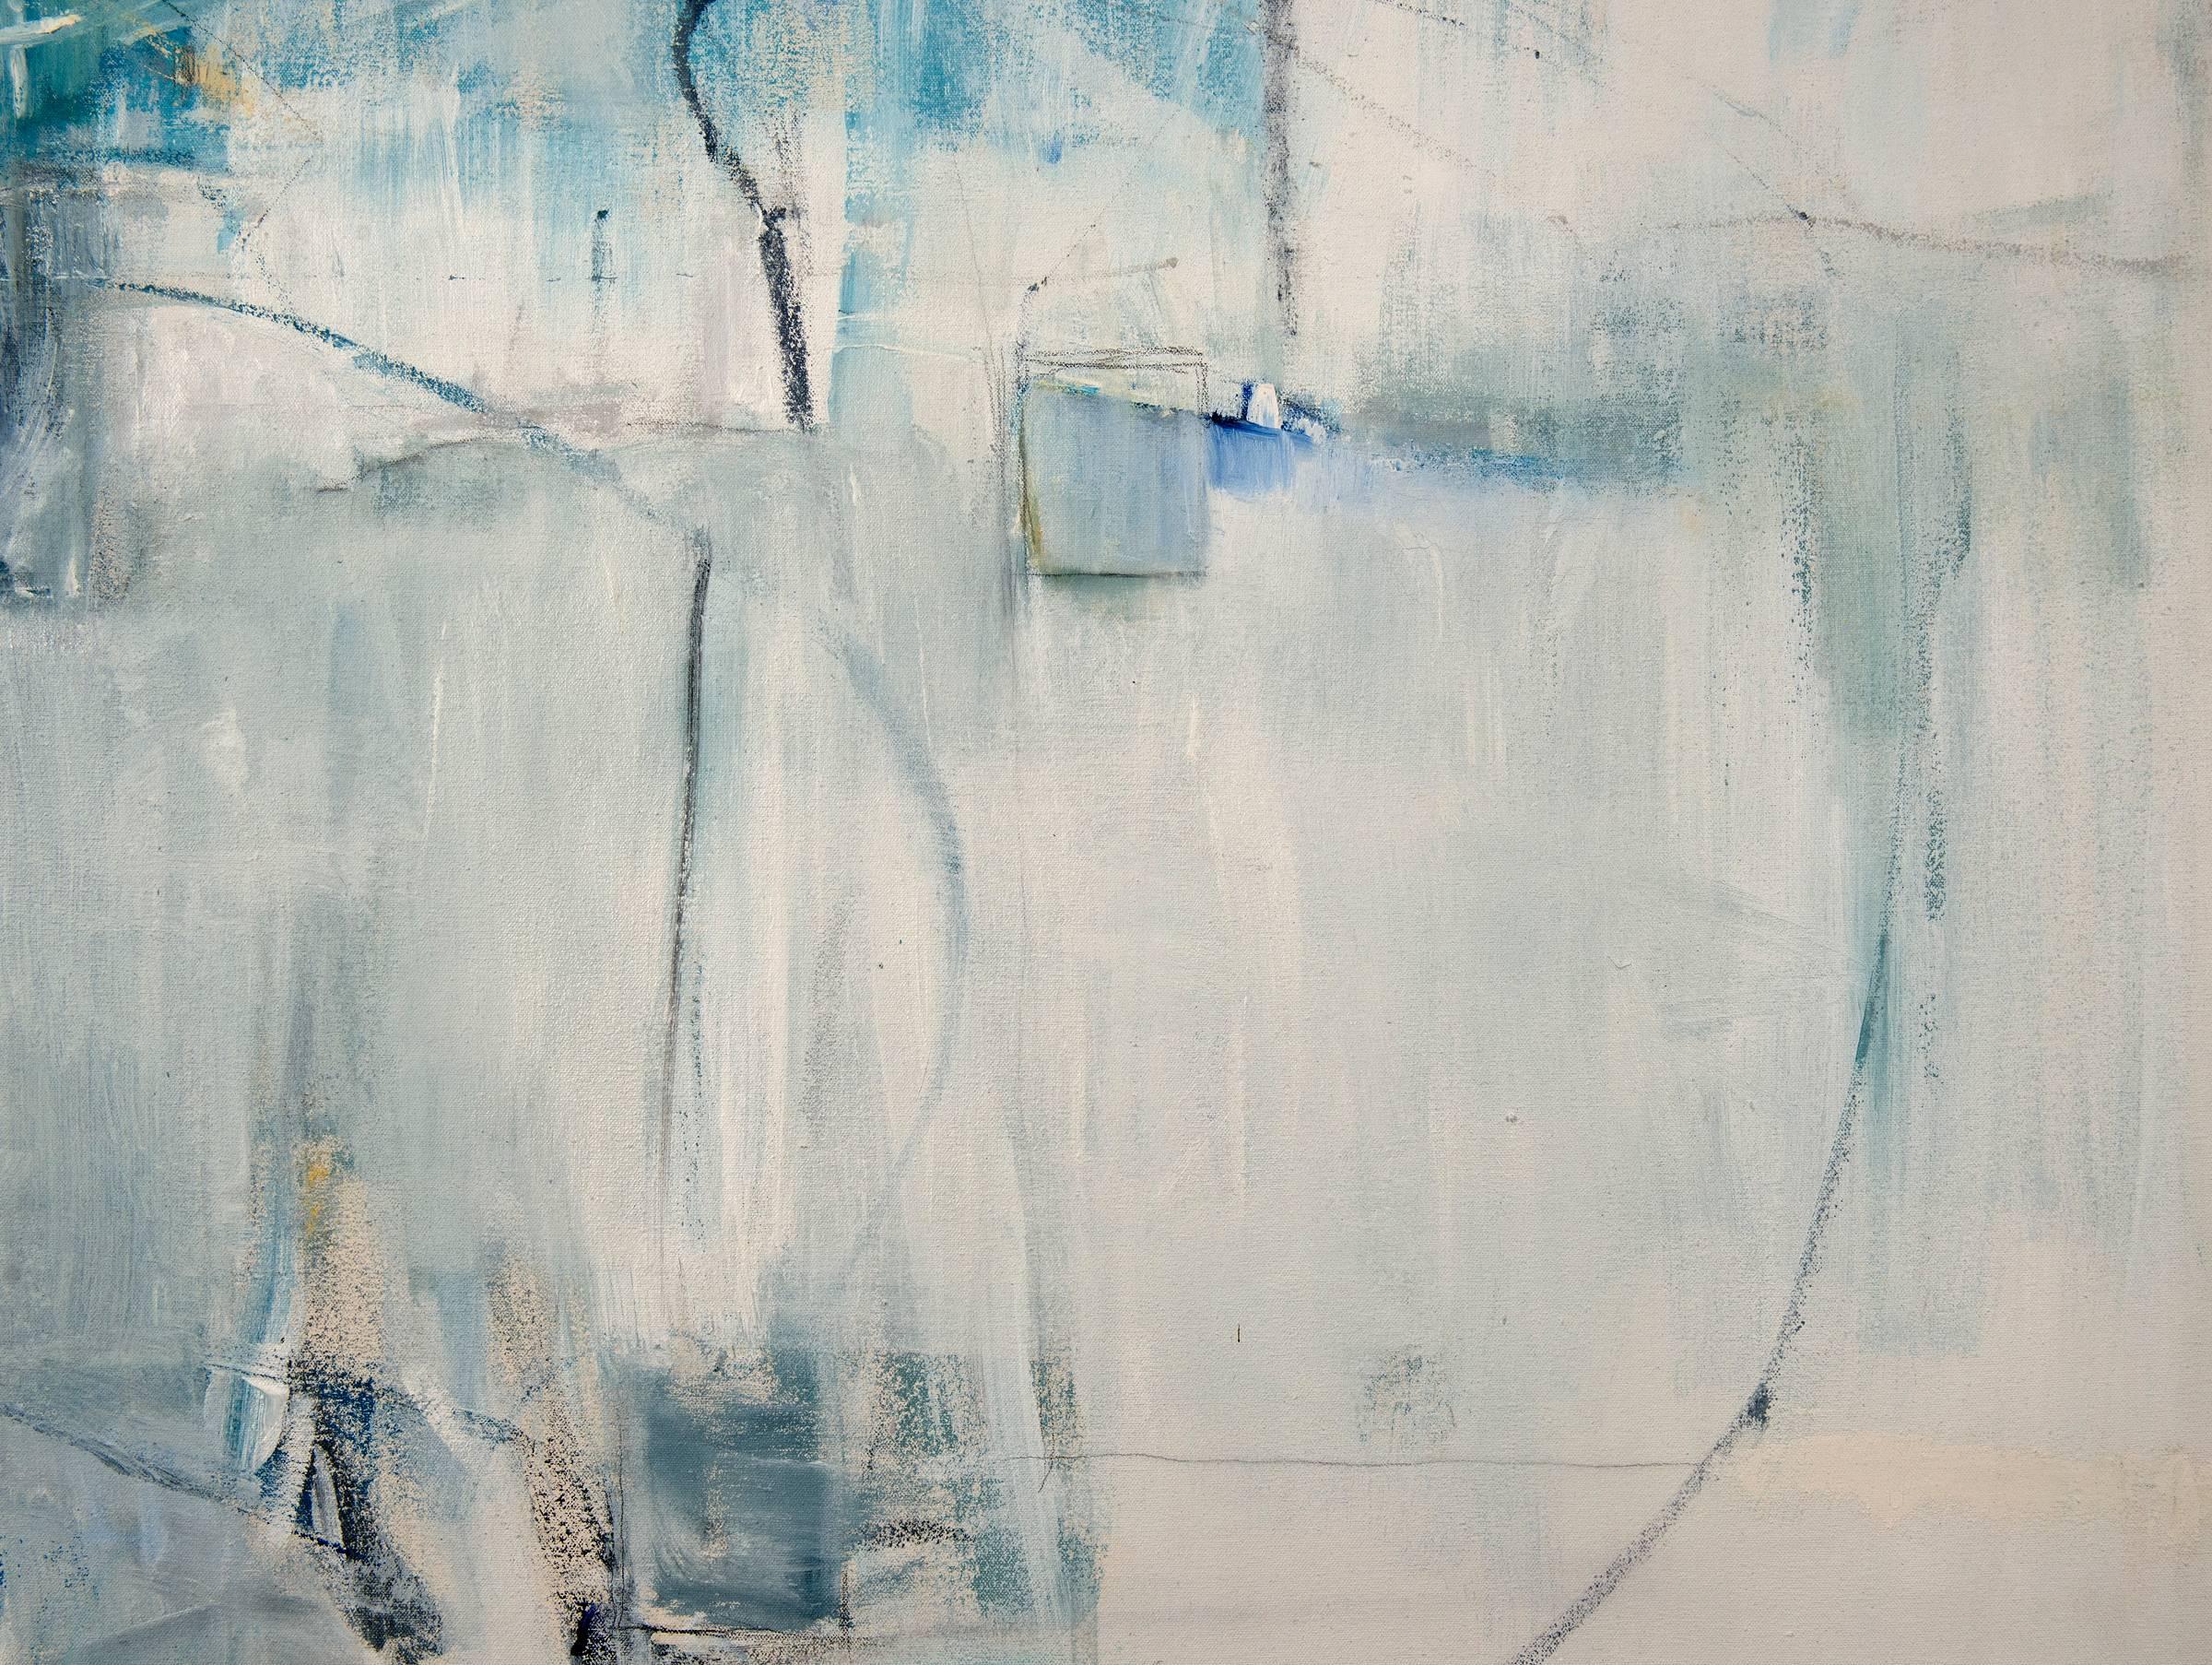 White Curtains at the Blue Motel - Contemporary Painting by Emilia Dubicki